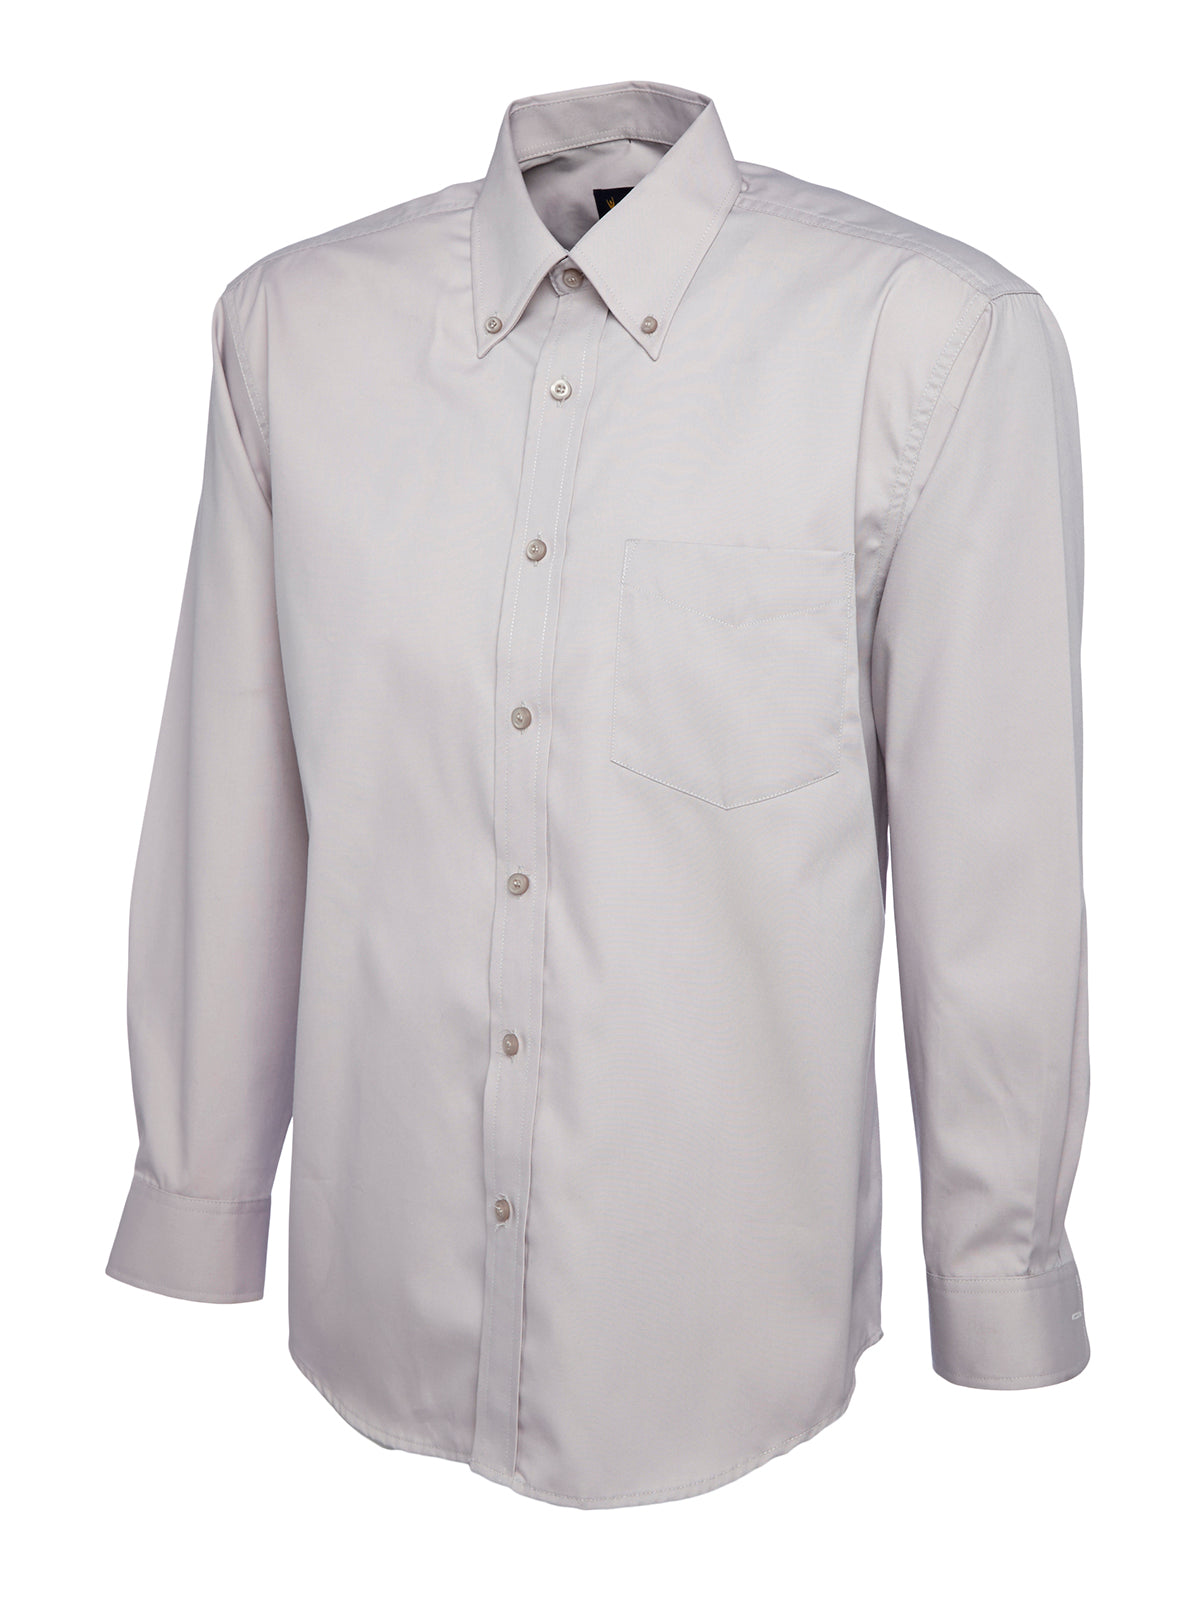 Uneek Mens Pinpoint Oxford Full Sleeve Shirt UC701 - Silver Grey